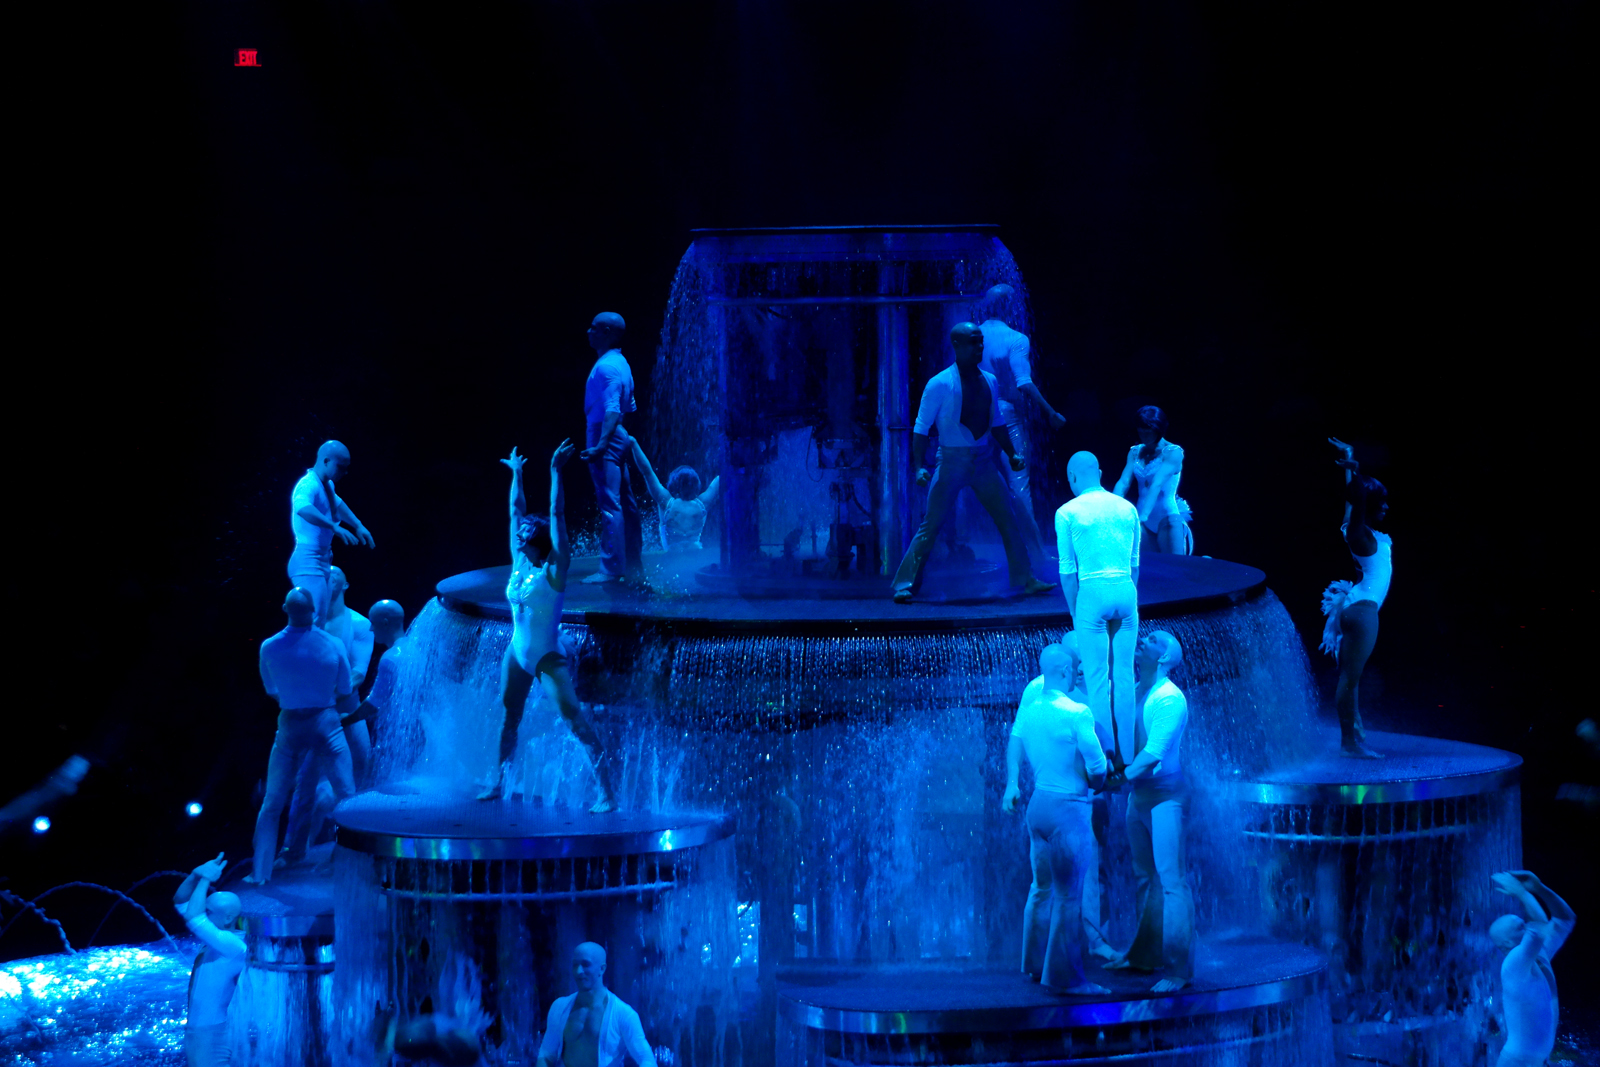 Le-Rêve-The-Dream-best-production-show-wynn-Las-Vegas-Perfomers-swimmers-acrobatics-water-Franco-Dragone-spectacle-le-reve-imagelogger-photo-by-united-states-of-paris-blog